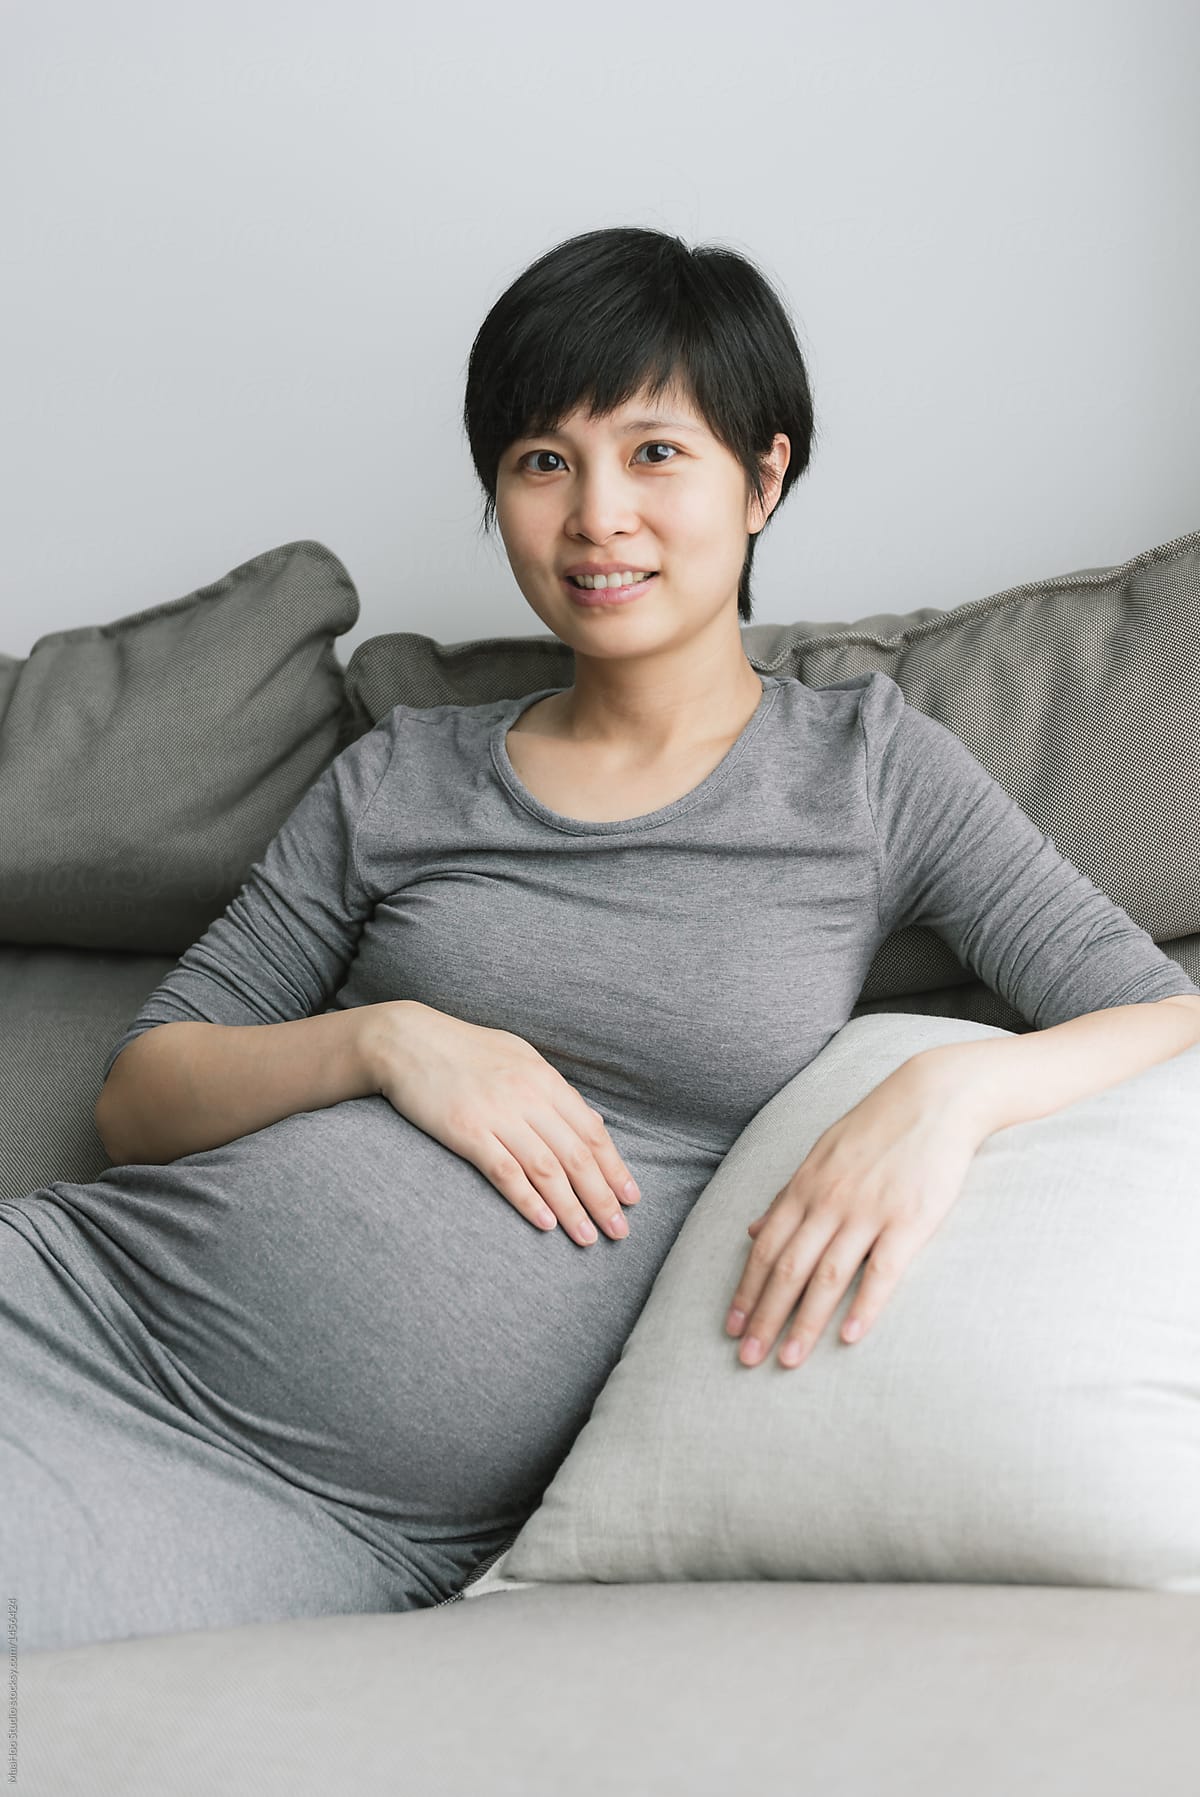 Young Pregnant Woman Holding Stomach By Stocksy Contributor Maahoo